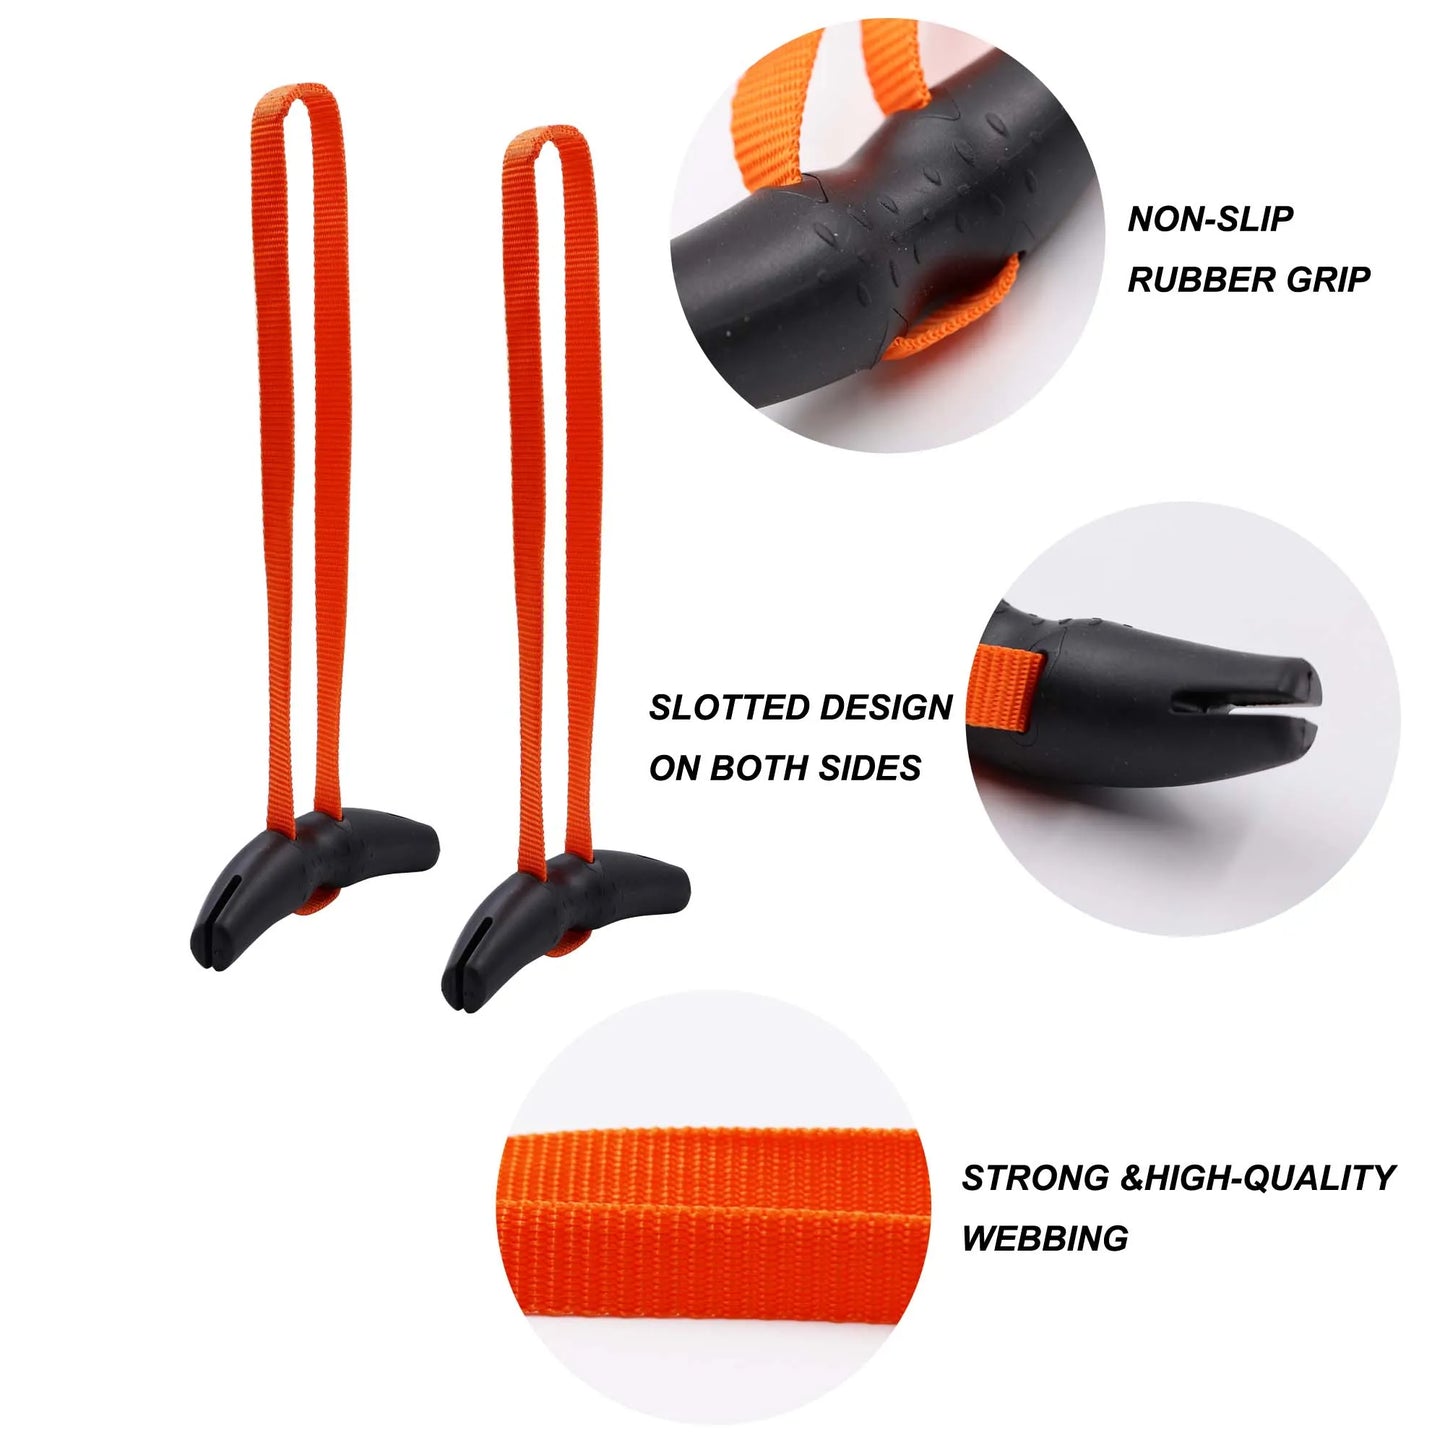 Gym Pull Up Handles Rubber Grip Heavy Duty Cable Machine Handles Weight-lifting Gym Equipment